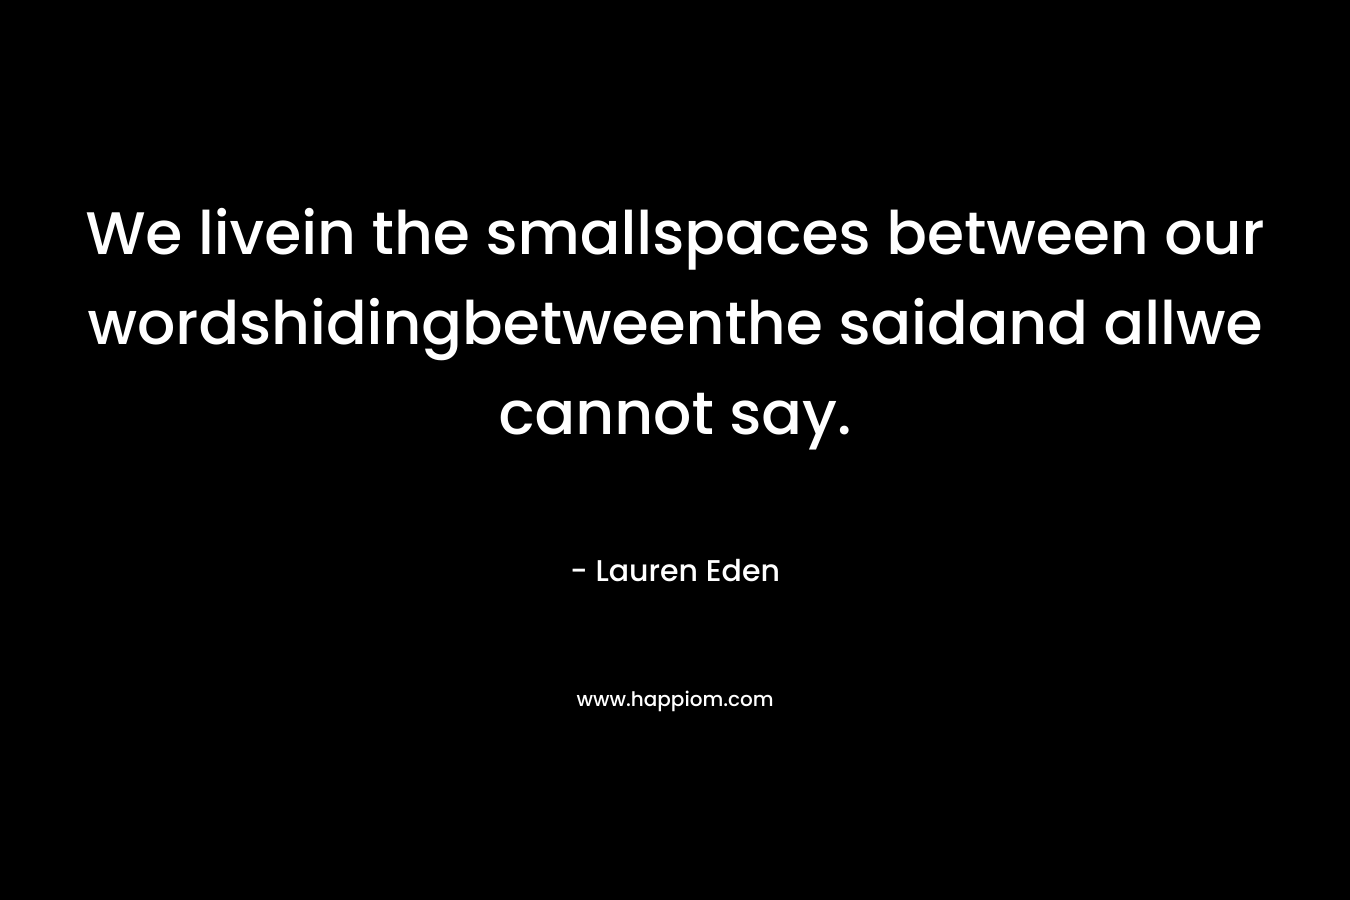 We livein the smallspaces between our wordshidingbetweenthe saidand allwe cannot say.